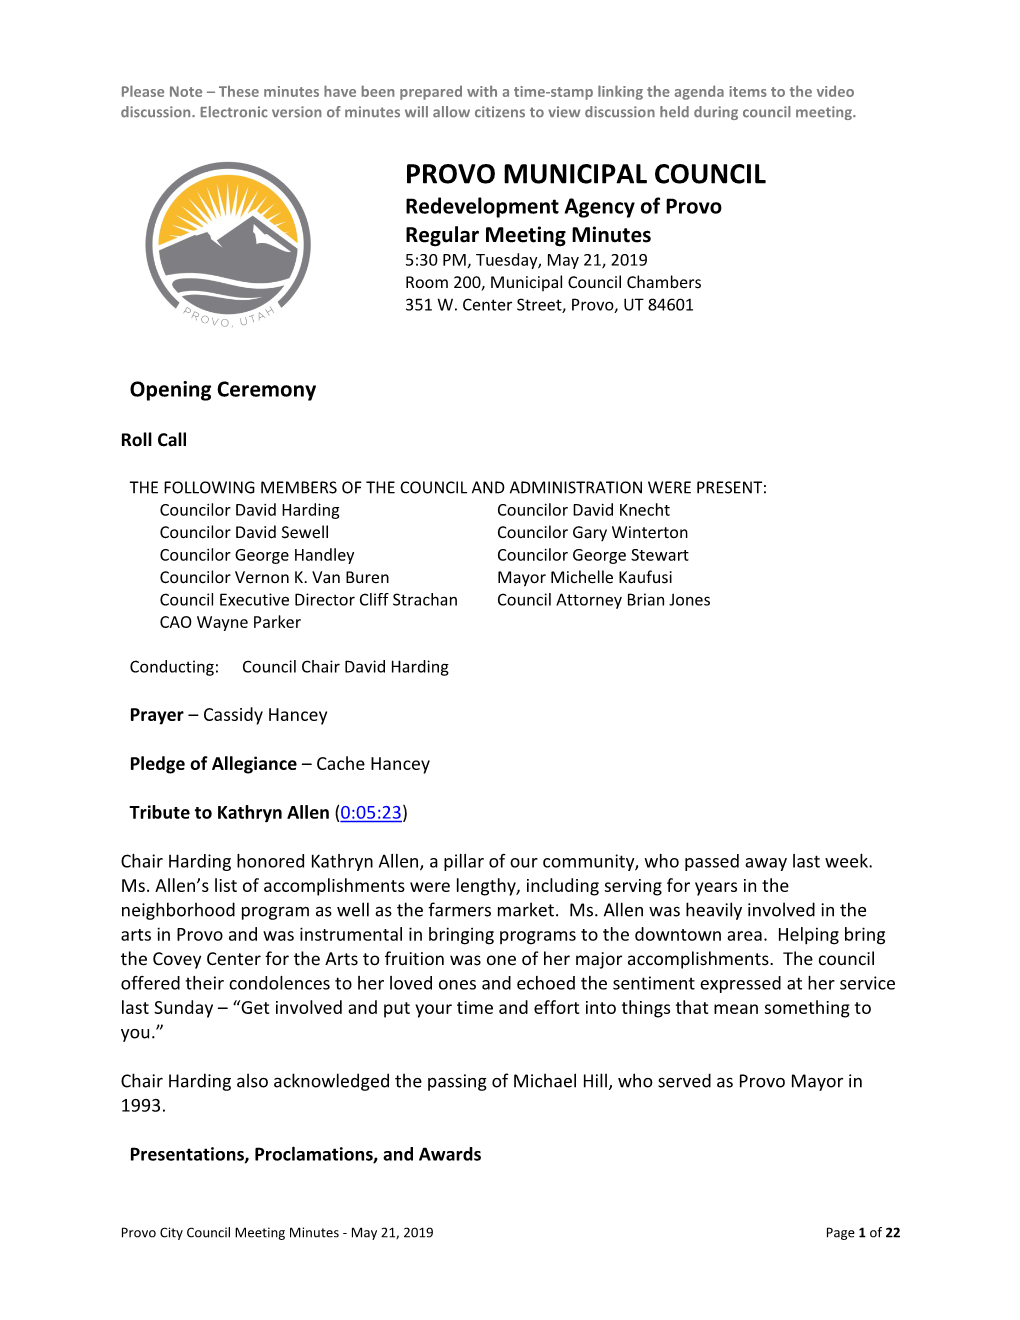 PROVO MUNICIPAL COUNCIL Redevelopment Agency of Provo Regular Meeting Minutes 5:30 PM, Tuesday, May 21, 2019 Room 200, Municipal Council Chambers 351 W